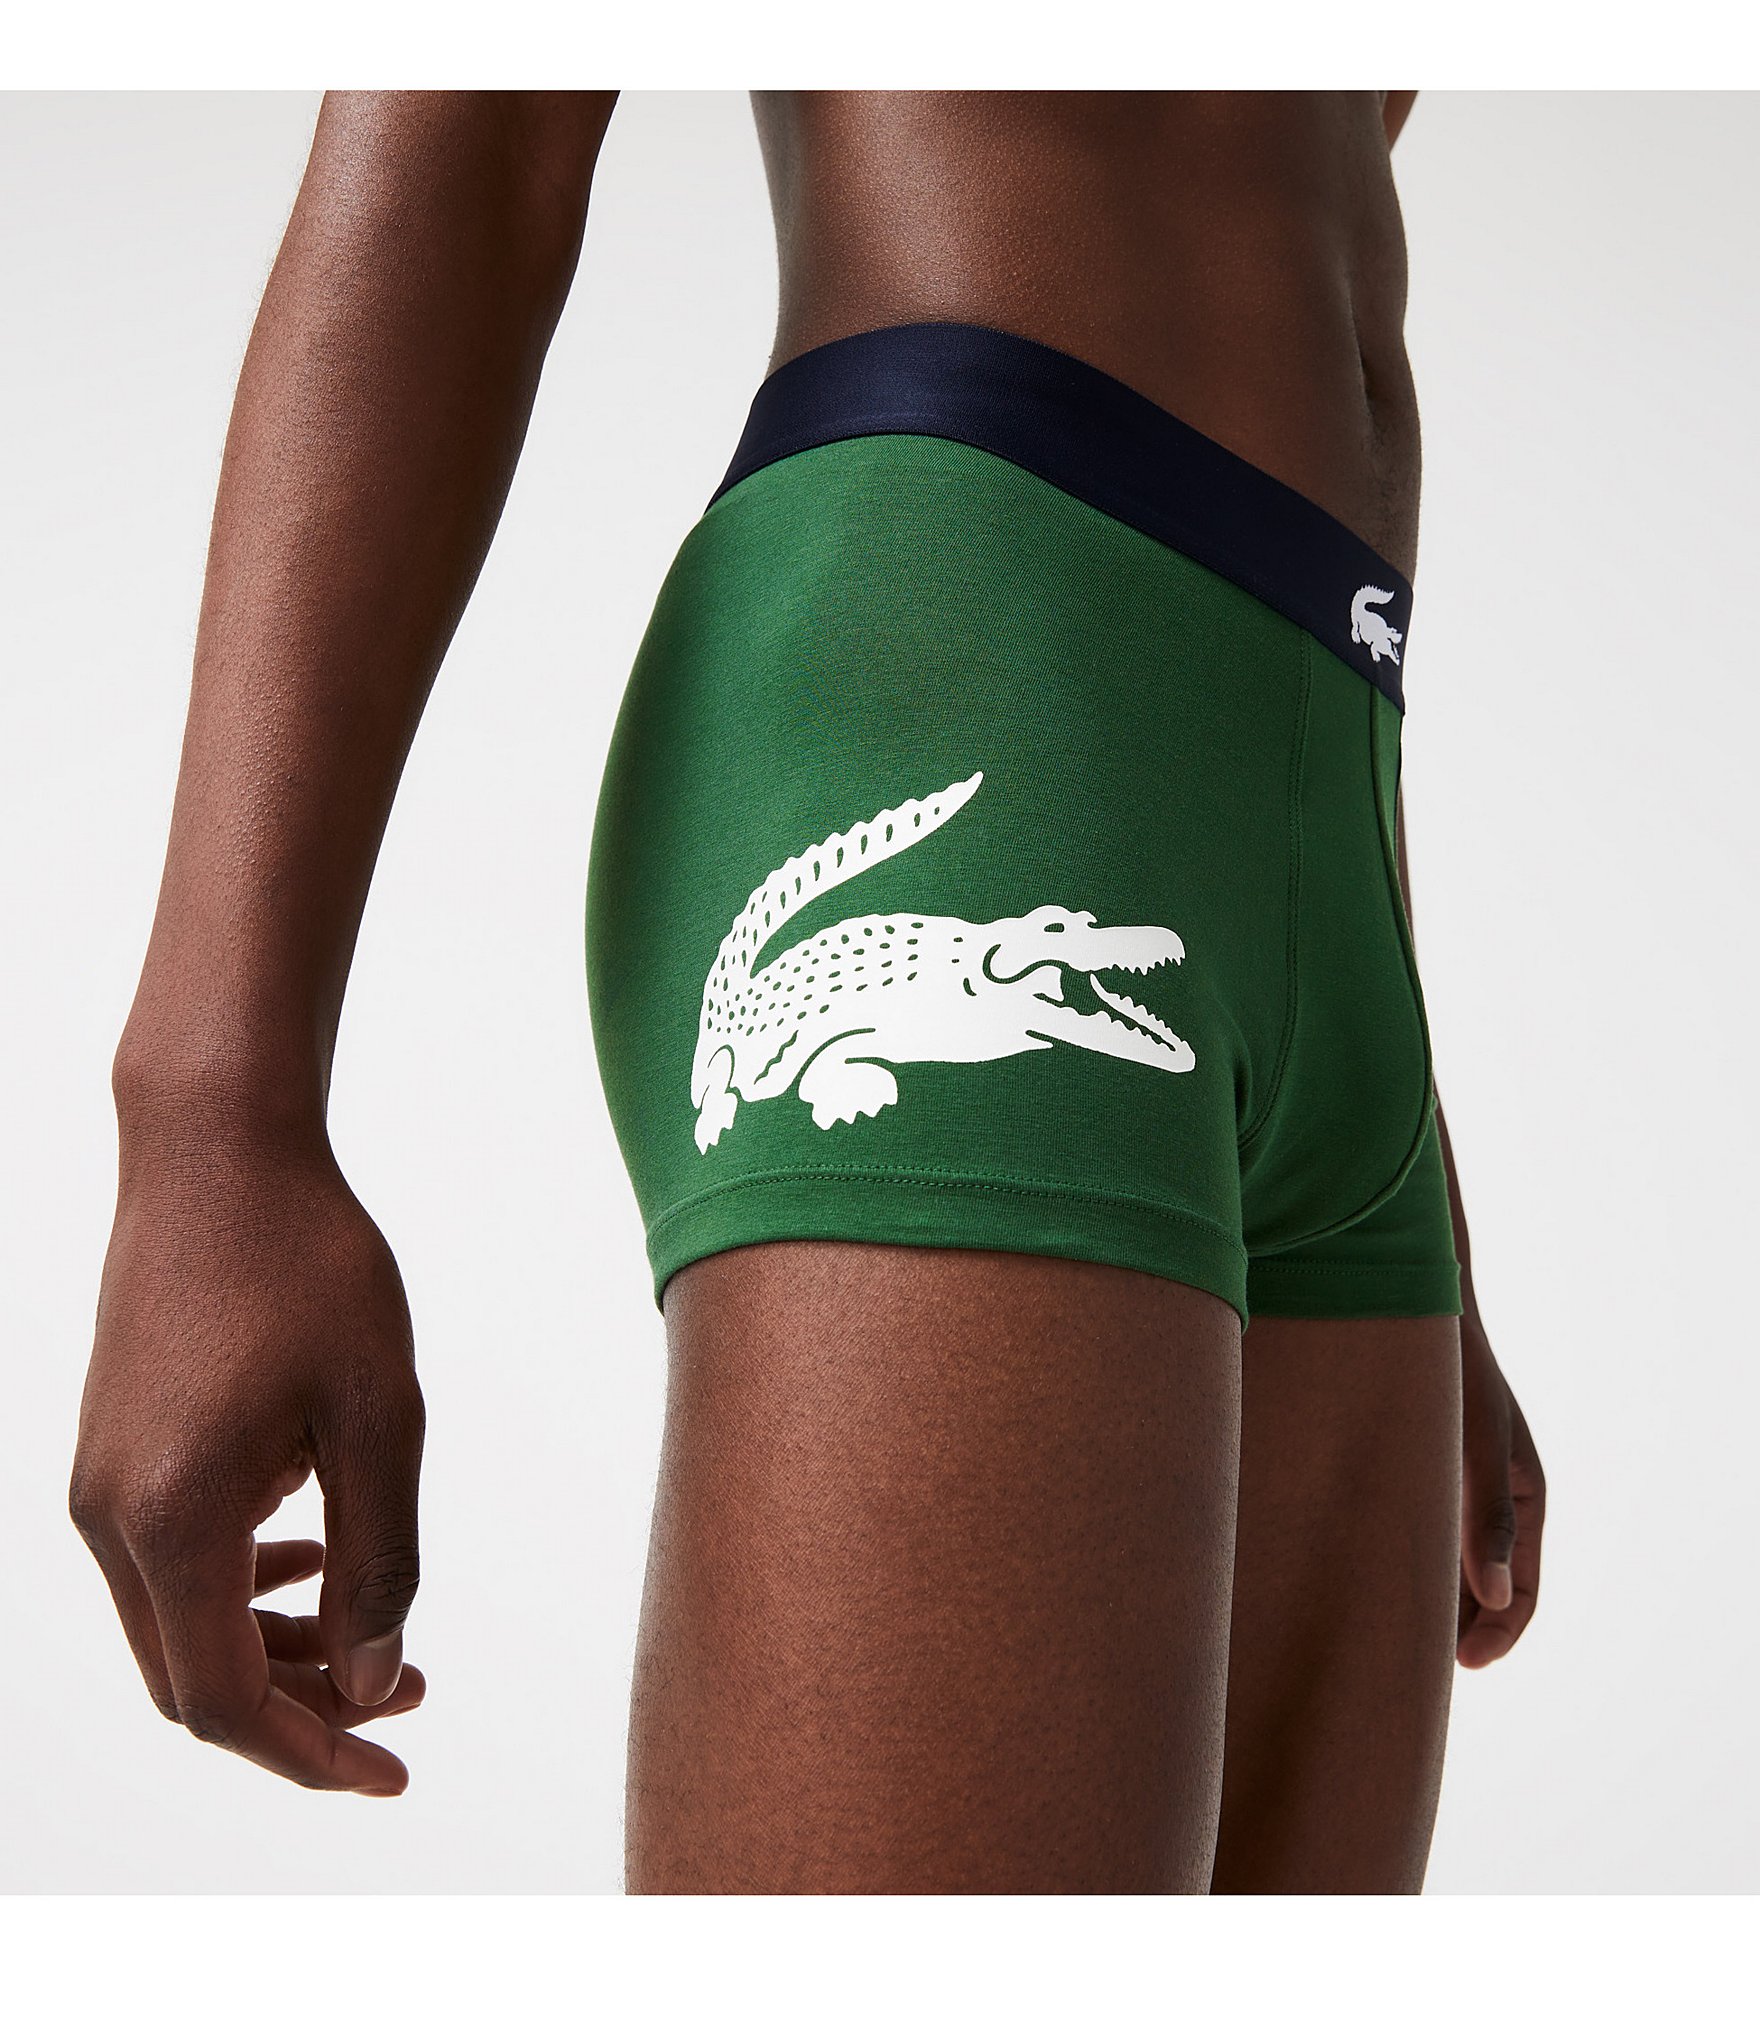 Lacoste Mismatched Trunks 3-Pack